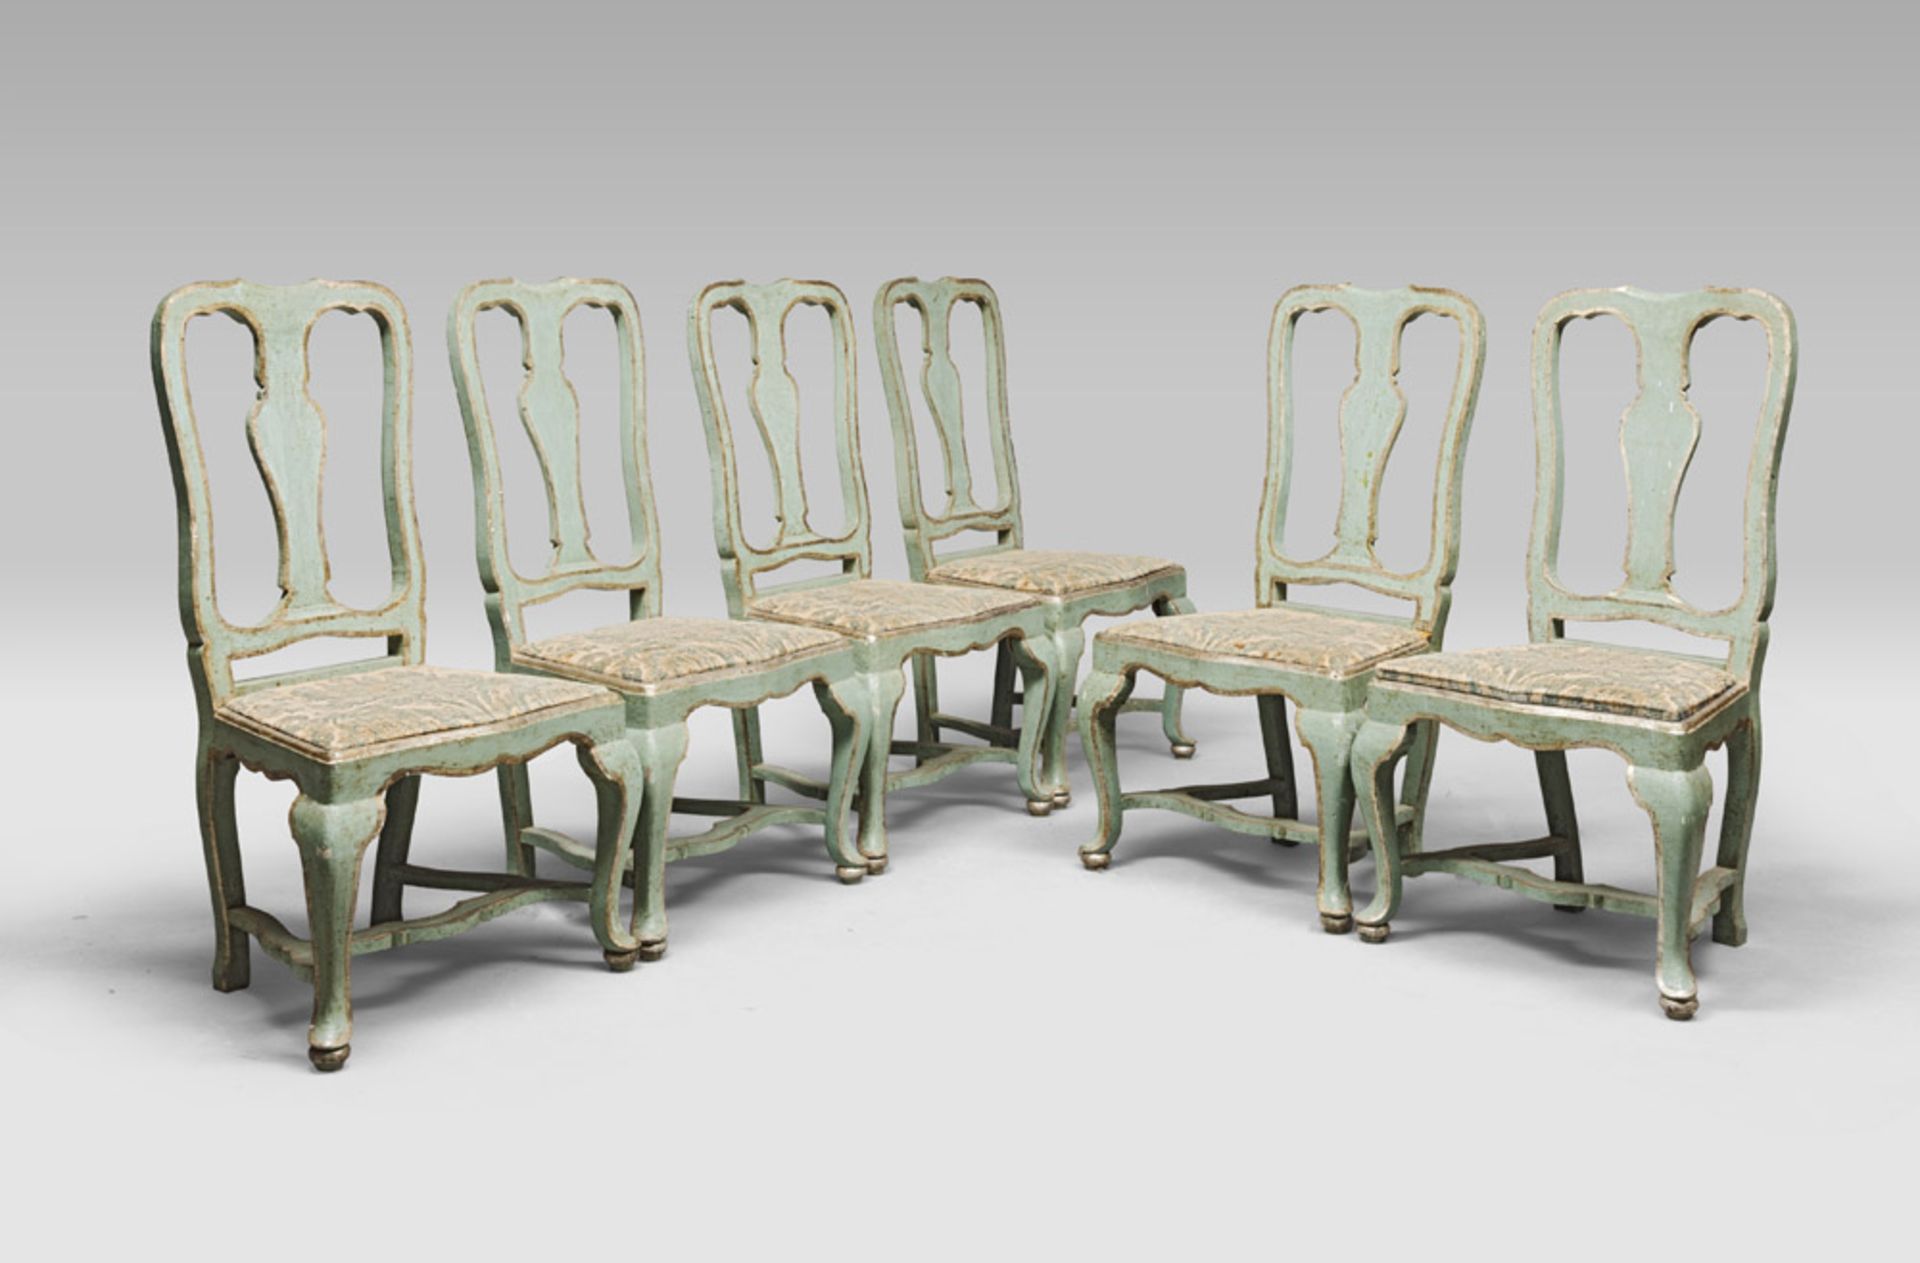 SIX BEAUTIFUL CHAIRS IN LACQUERED WOOD, MARCHE 18TH CENTURY with aquamarine undercoat and